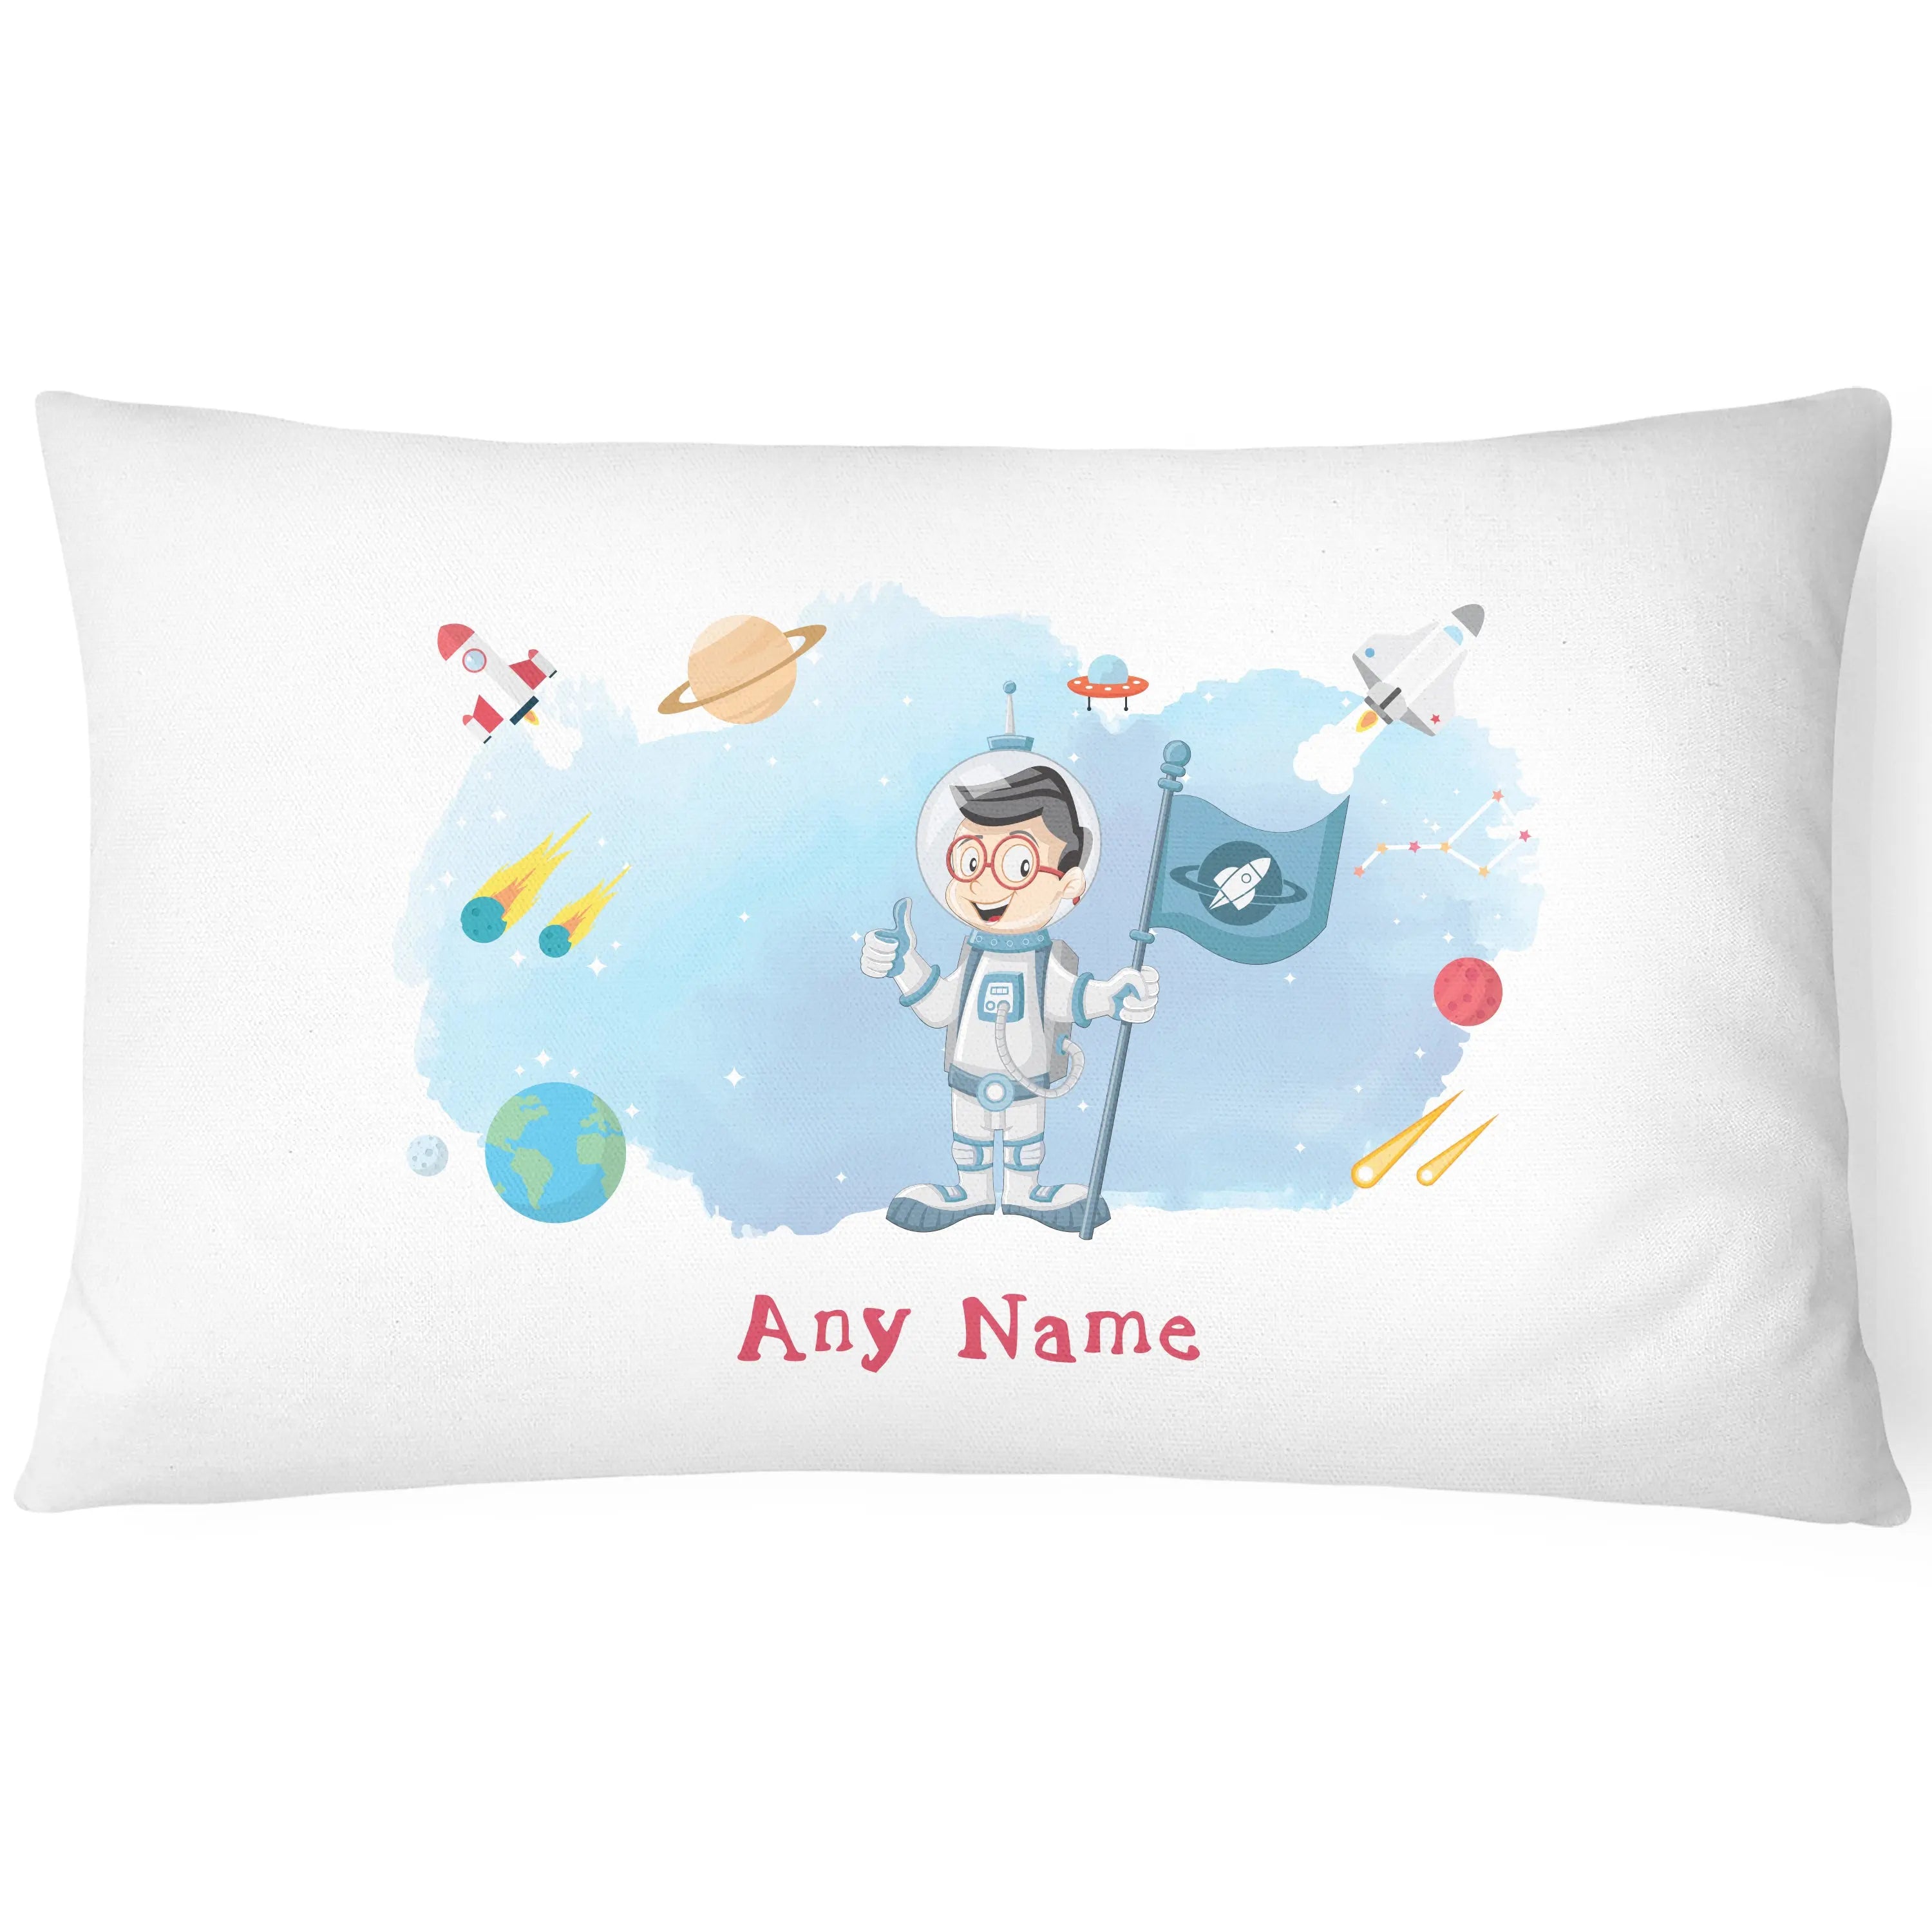 Space Pillowcase for Kids - Personalise With Any Name - Planted - CushionPop